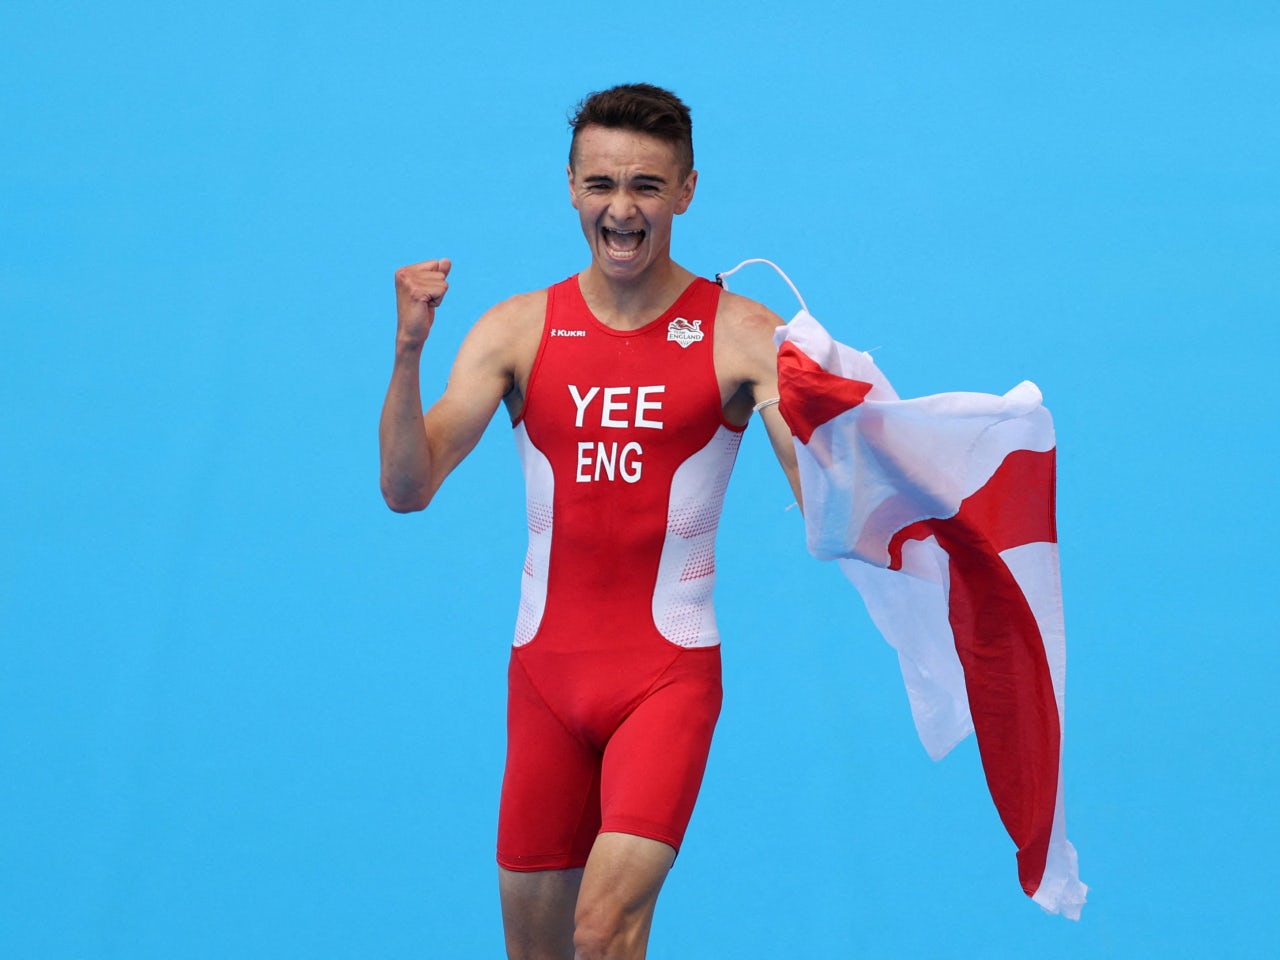 GB's Alex Yee finishes second overall in World Triathlon Championship Series